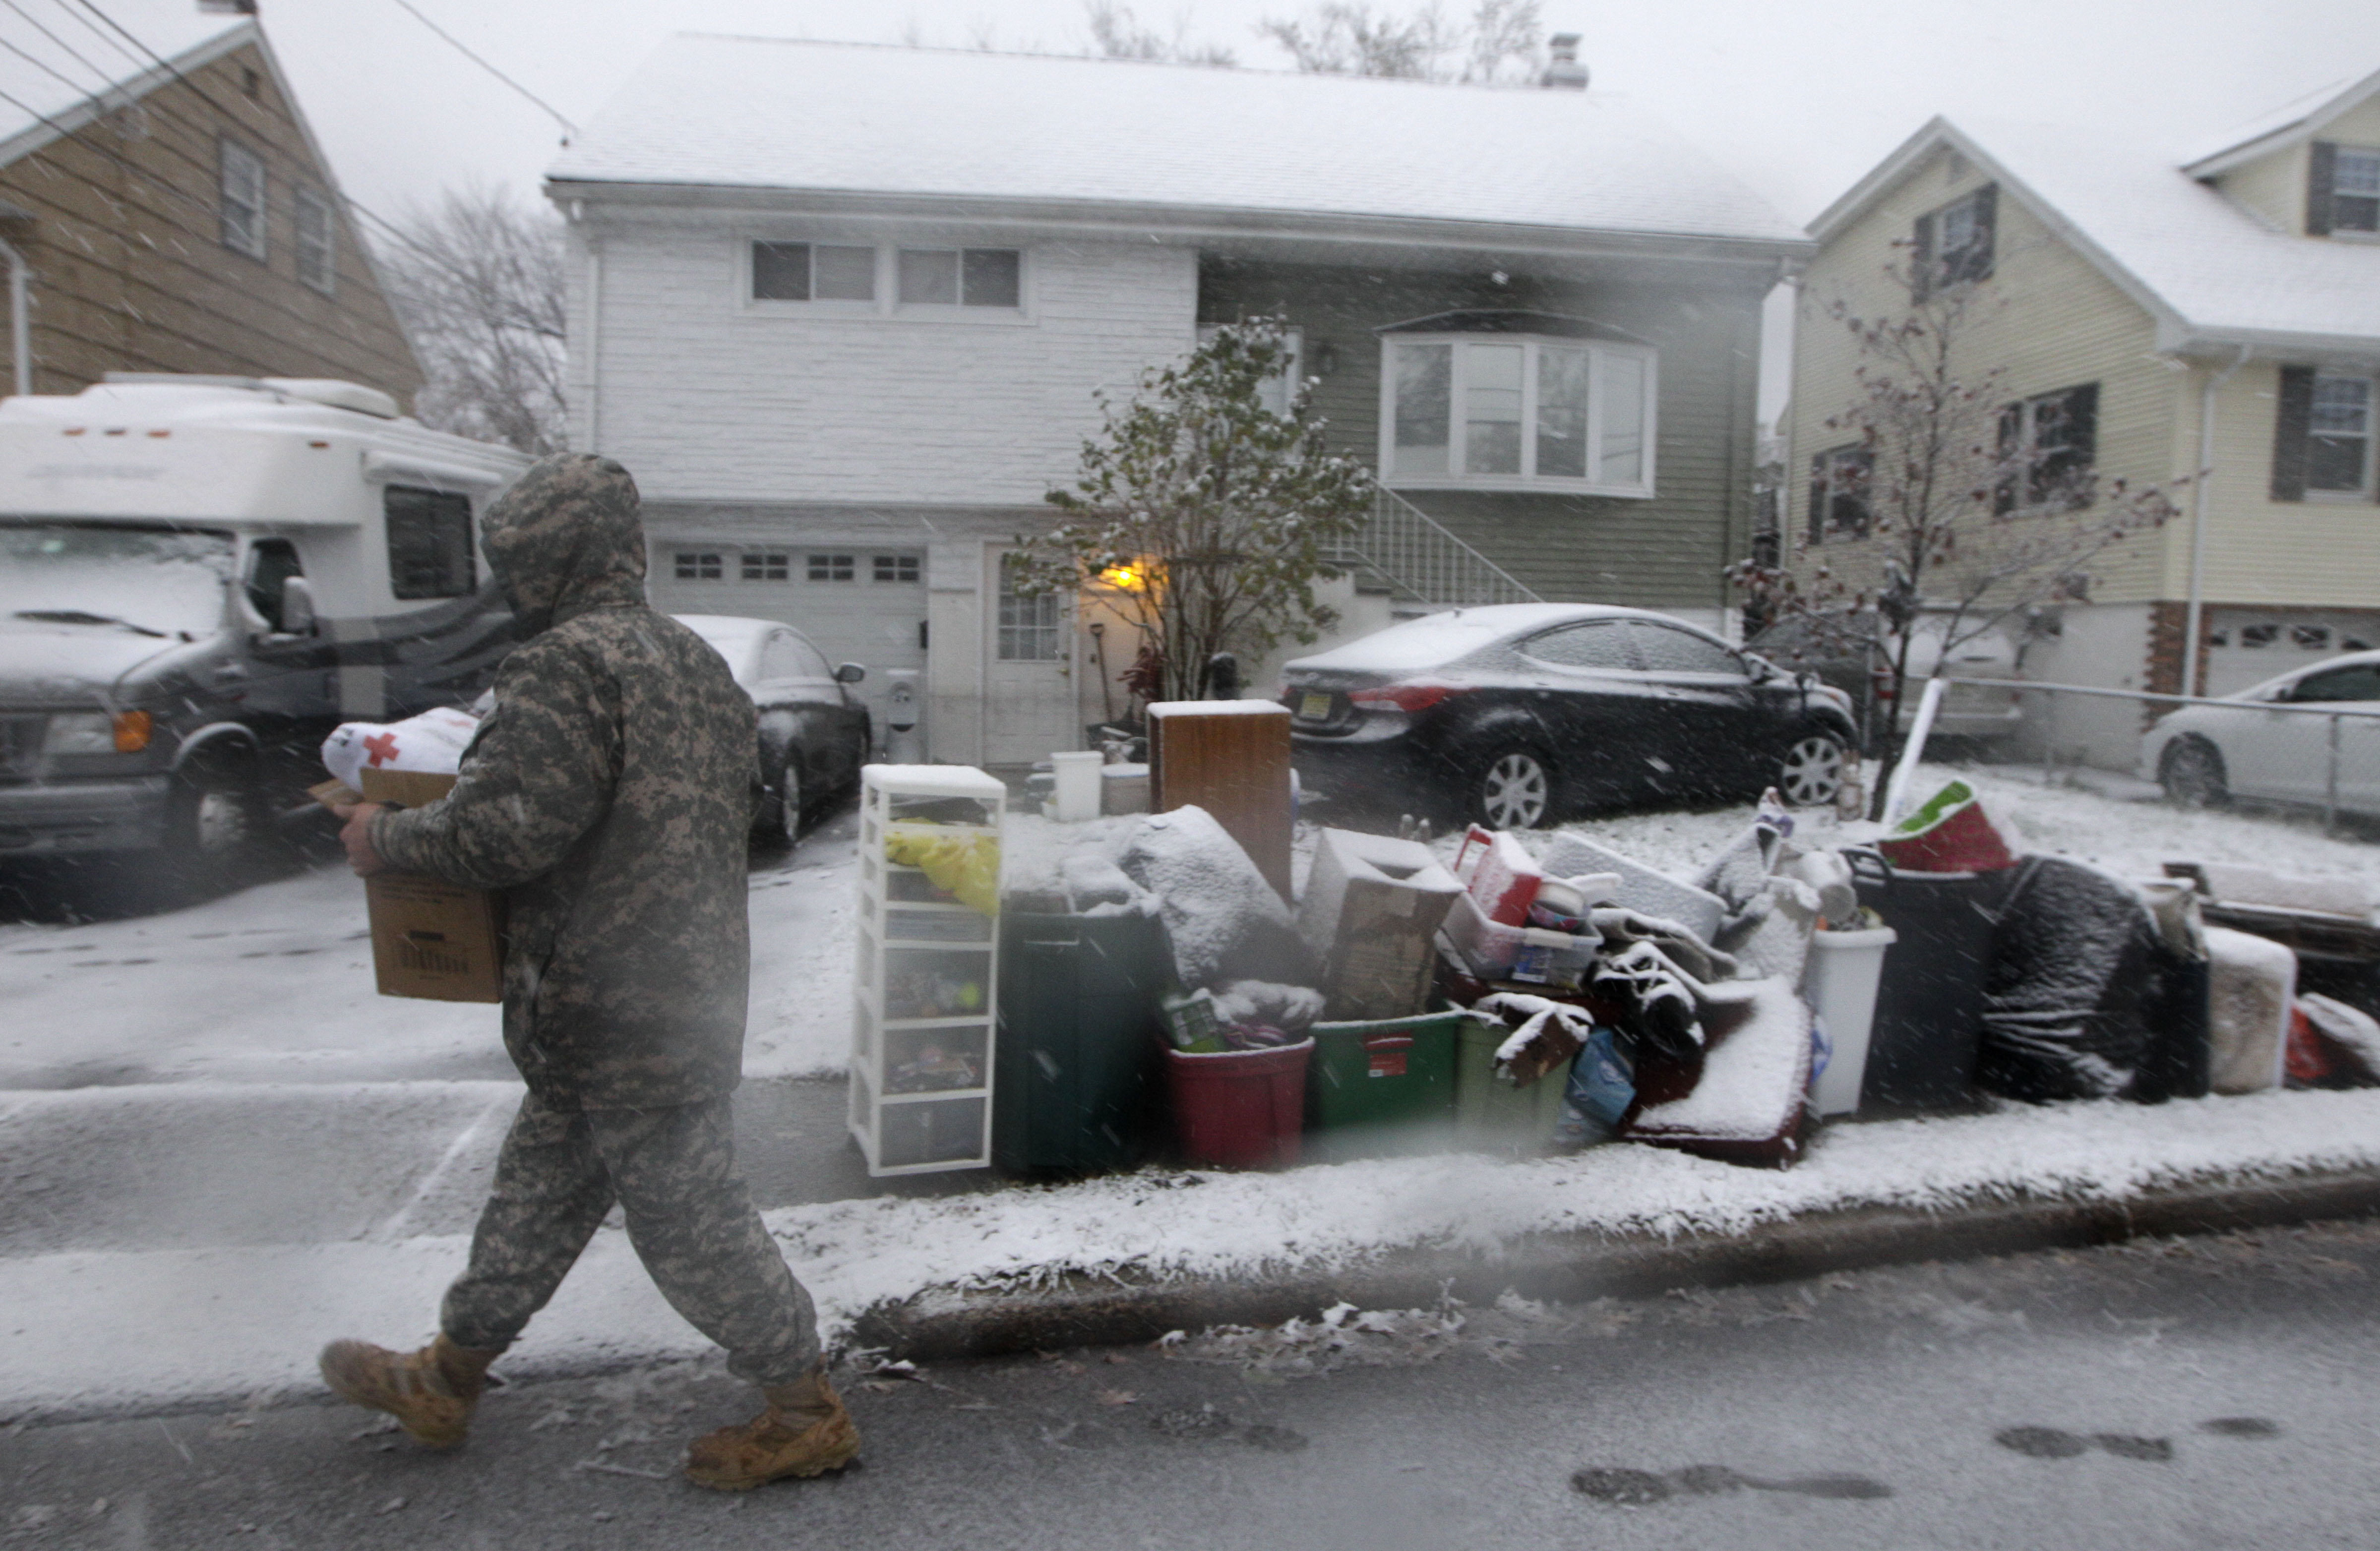 National Guardsman Brandon Kyle, left, goes door-to-door offering blankets donated by the American Red Cross to residents of Little Ferry, N.J., a neighborhood that was flooded by Superstorm Sandy as a Noreaster approached, Wednesday, Nov. 7, 2012. (AP Photo/Kathy Willens)